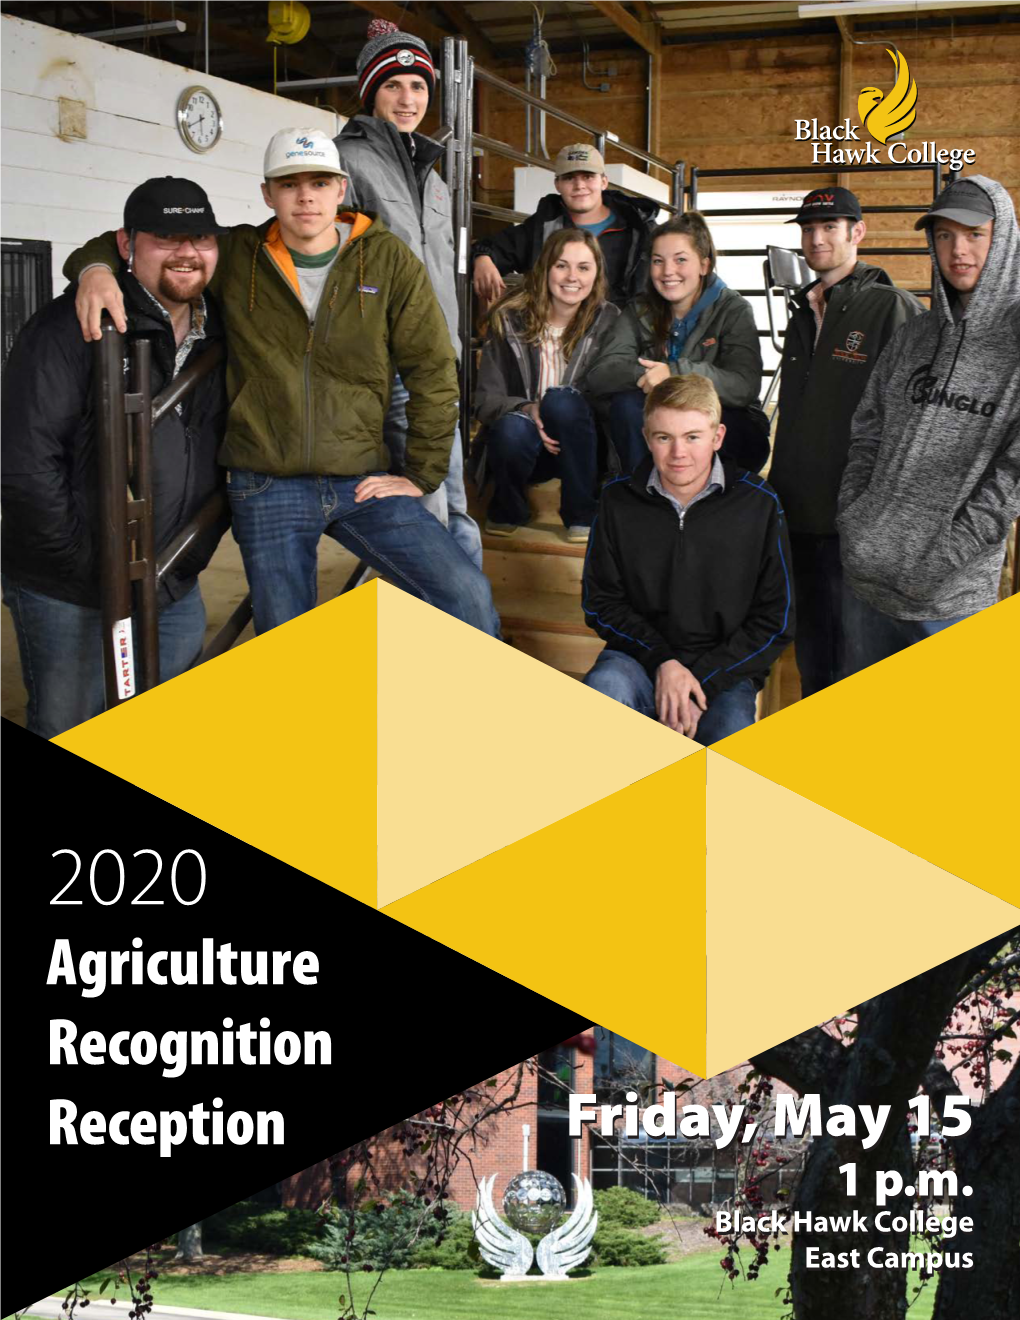 2020 Agriculture Recognition Reception Friday, May 15 1 P.M